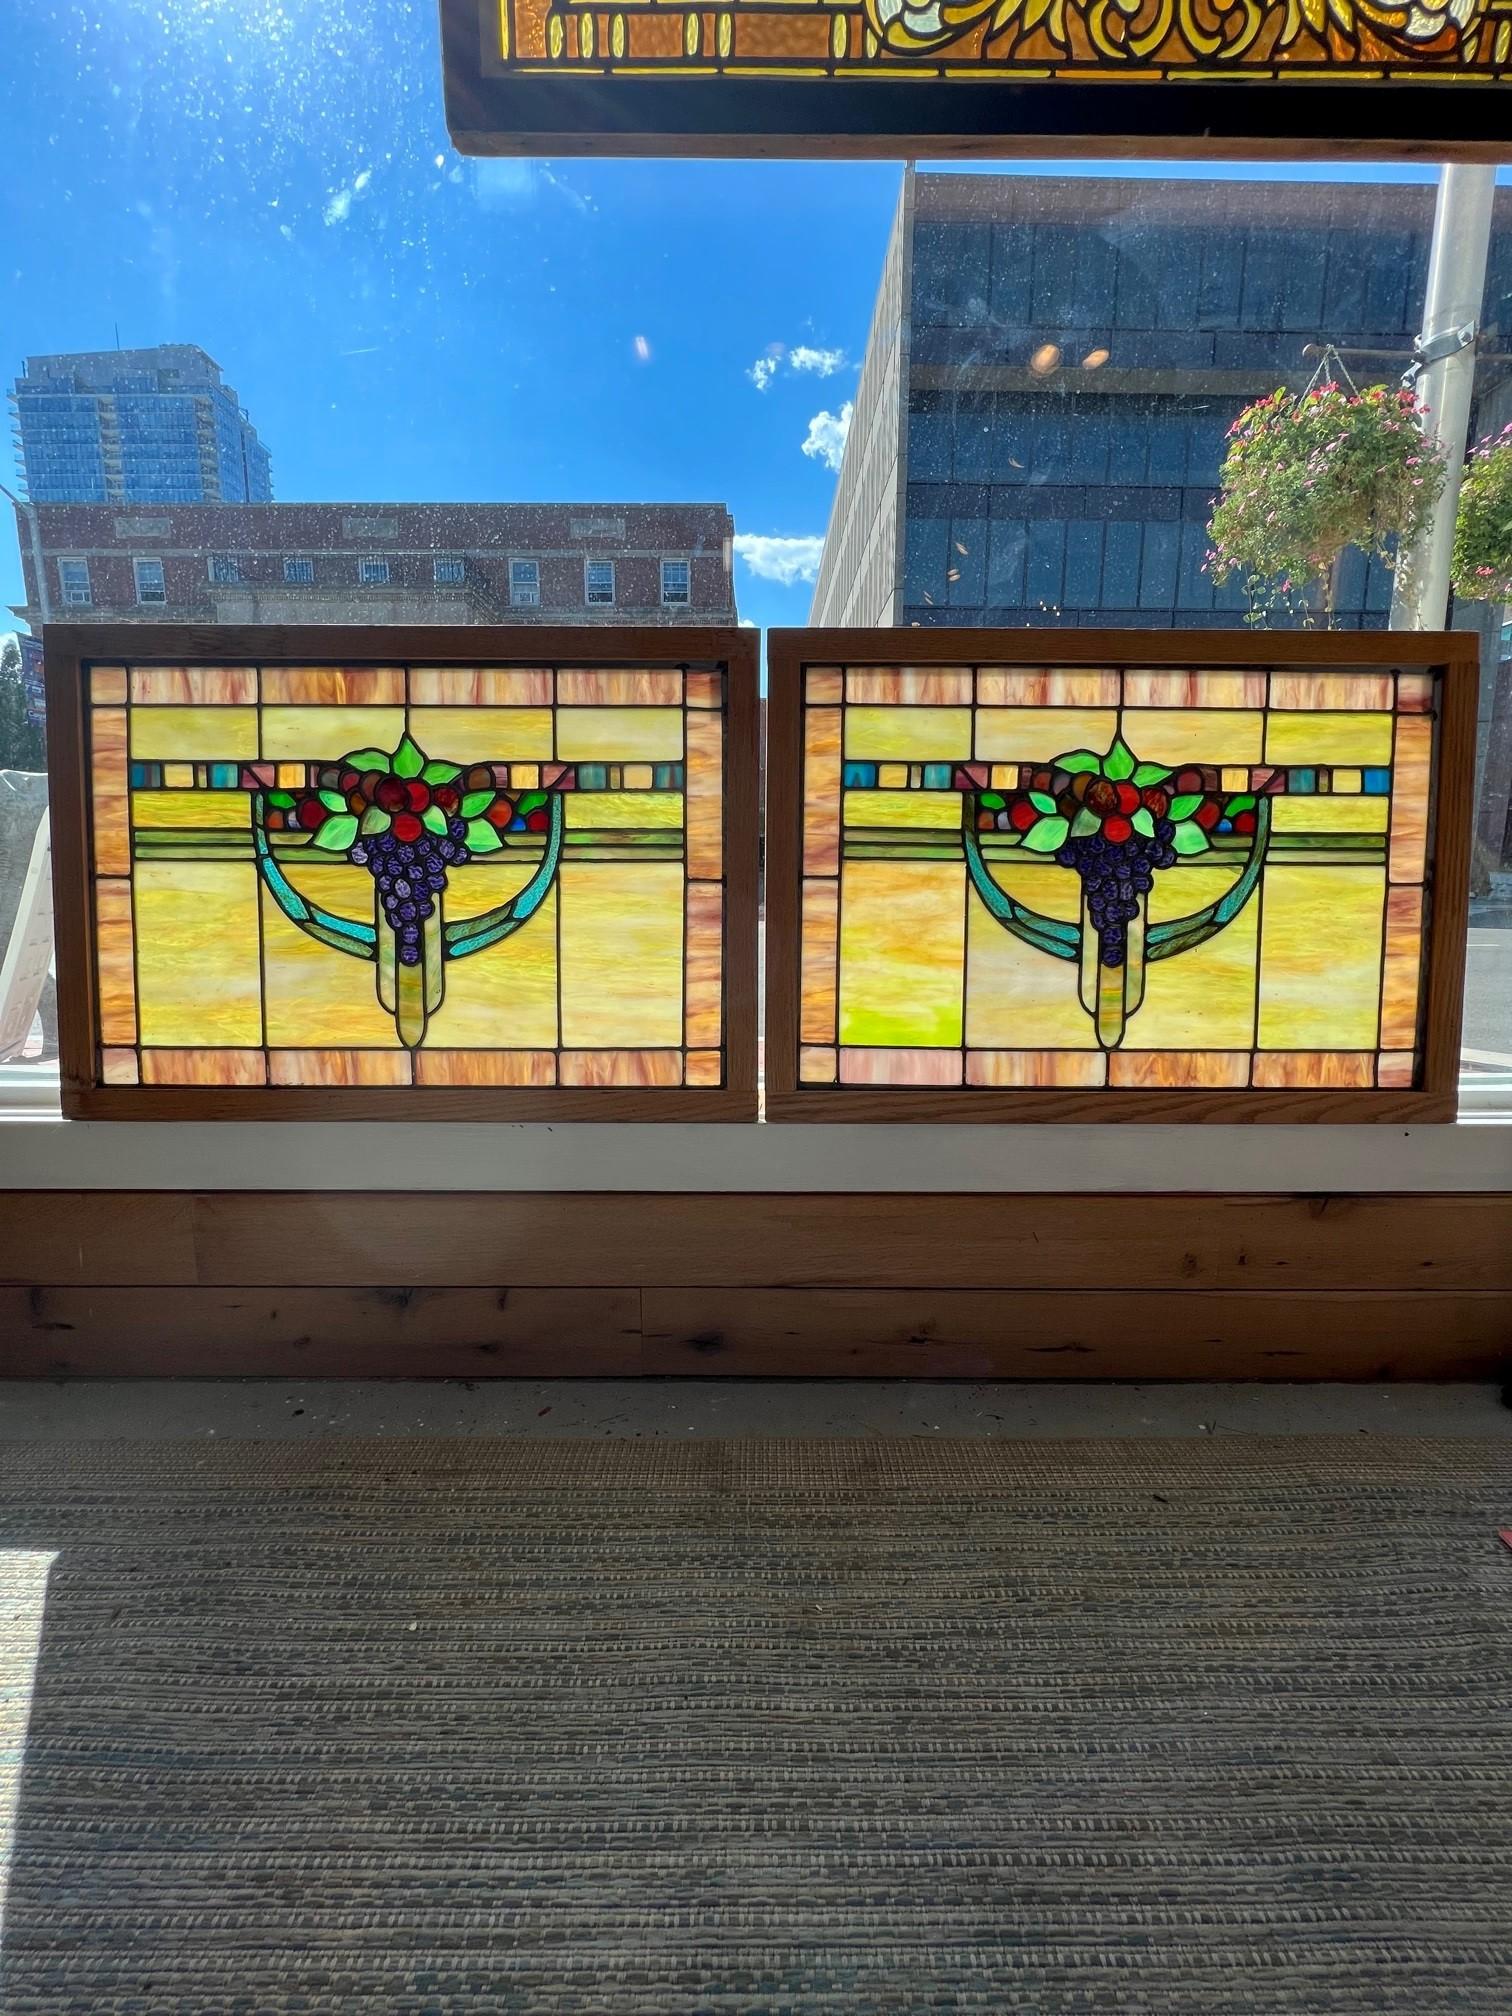 Beautiful pair of Art Deco stained glass windows with hanging grapes in the center. The colors are amazing in this pair of windows perfect for a kitchen or wine ceiler. In great condition no breaks in the glass and a new oak frame very sturdy.